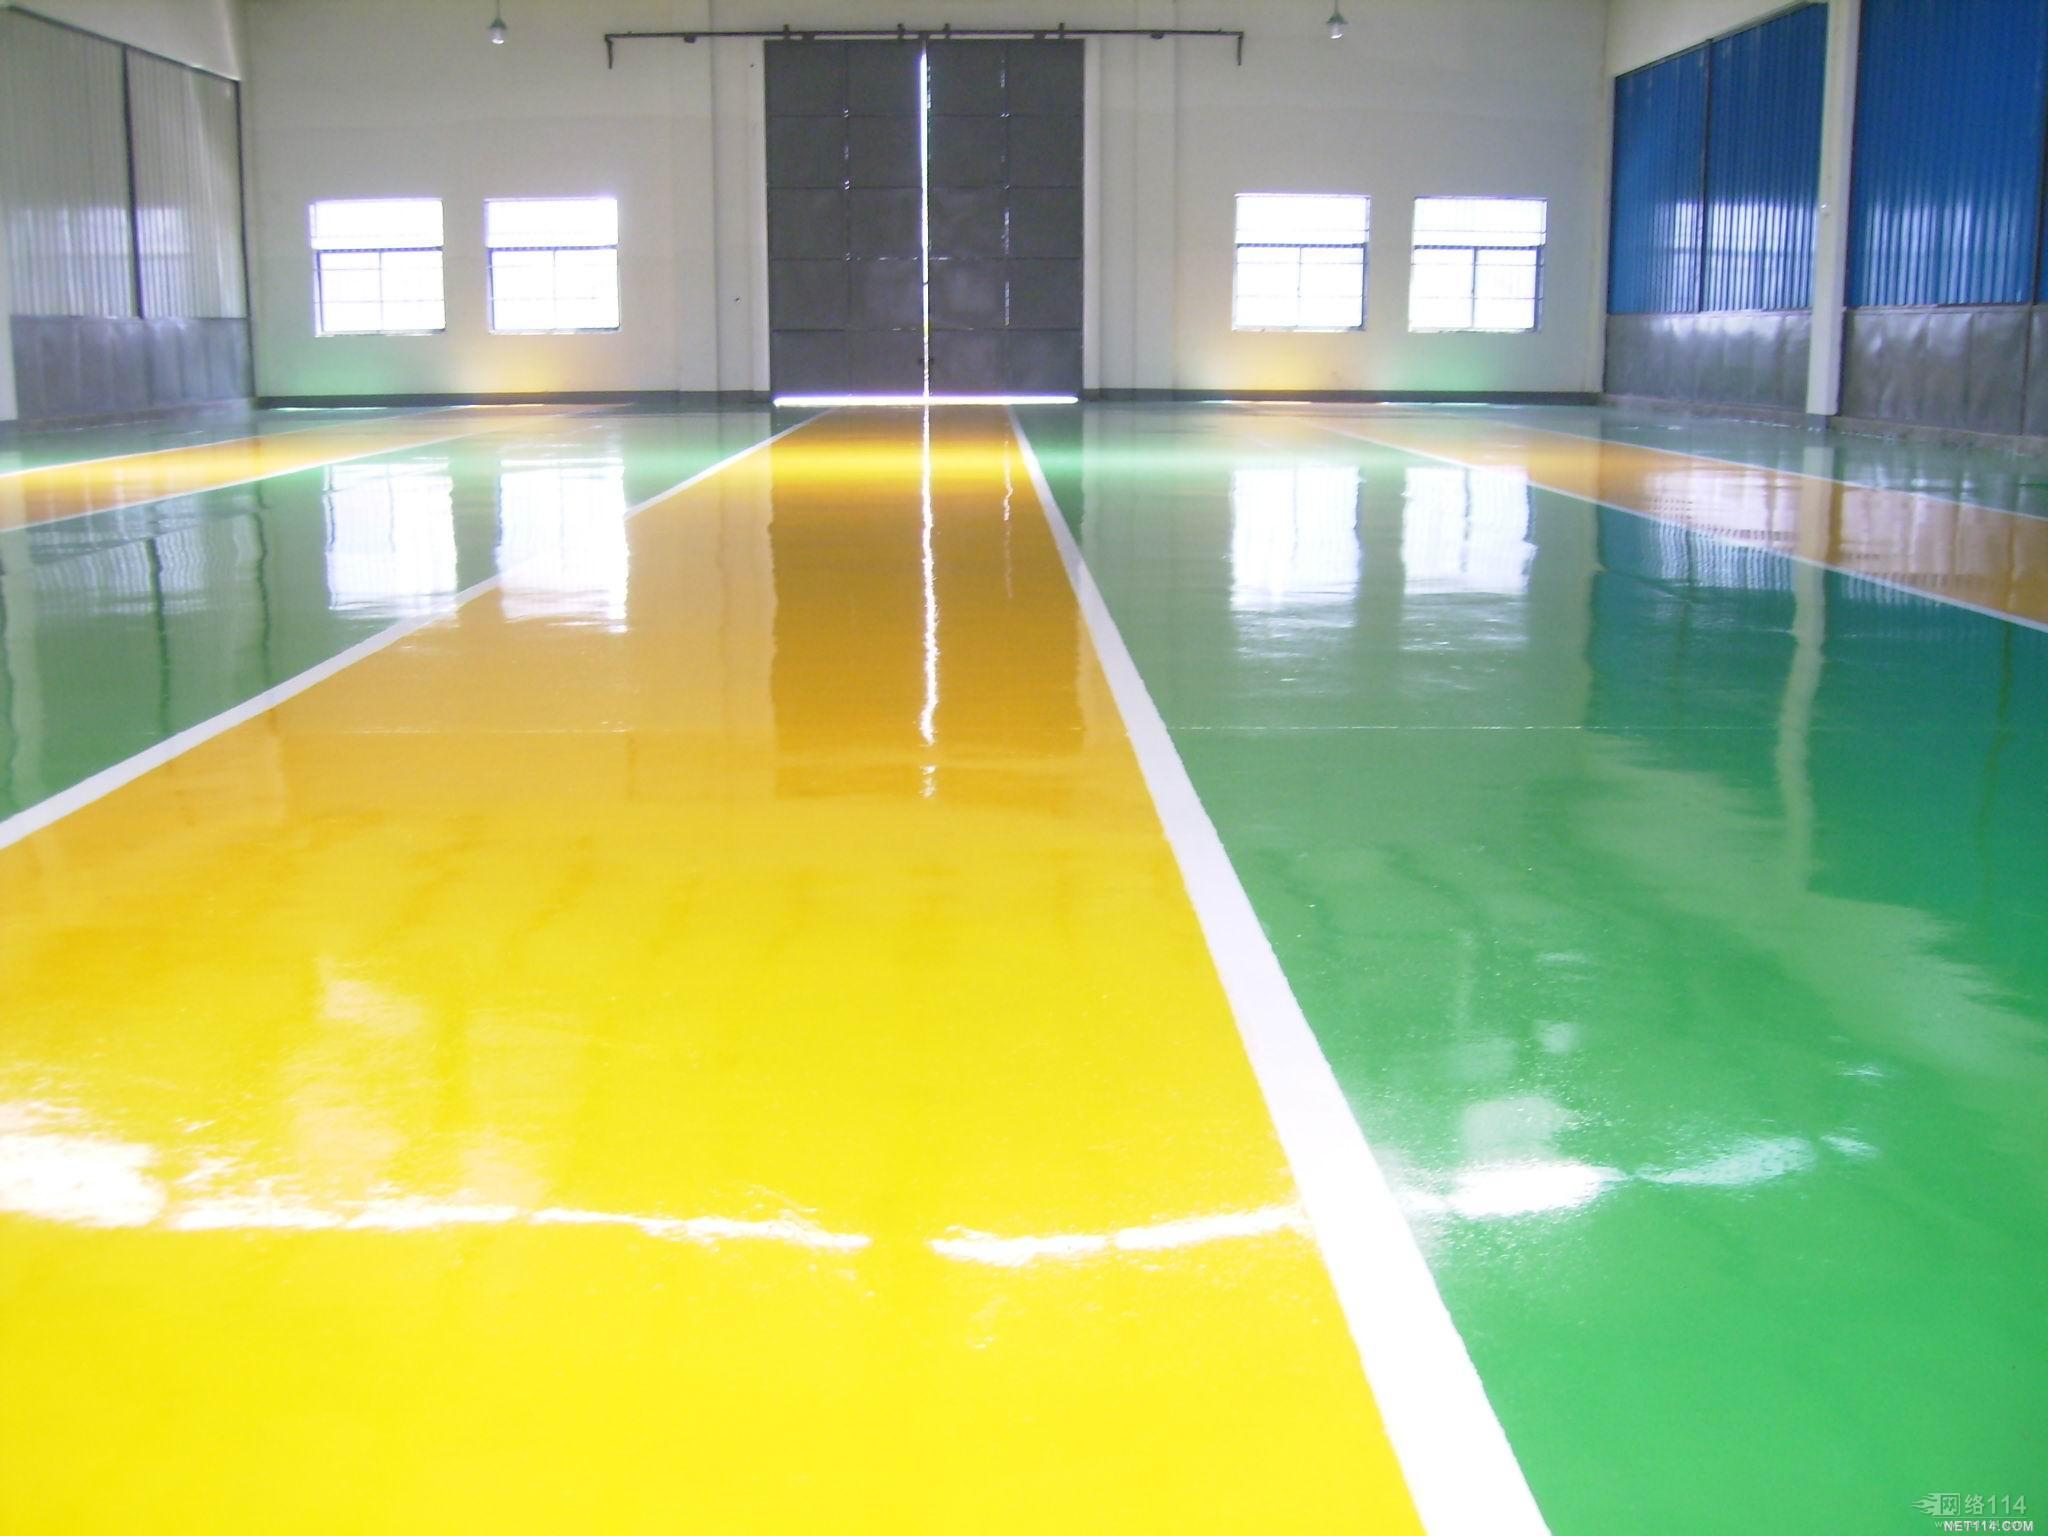  Epoxy  Floor Paint  Manufacturer in Tamil Nadu India by Sri 